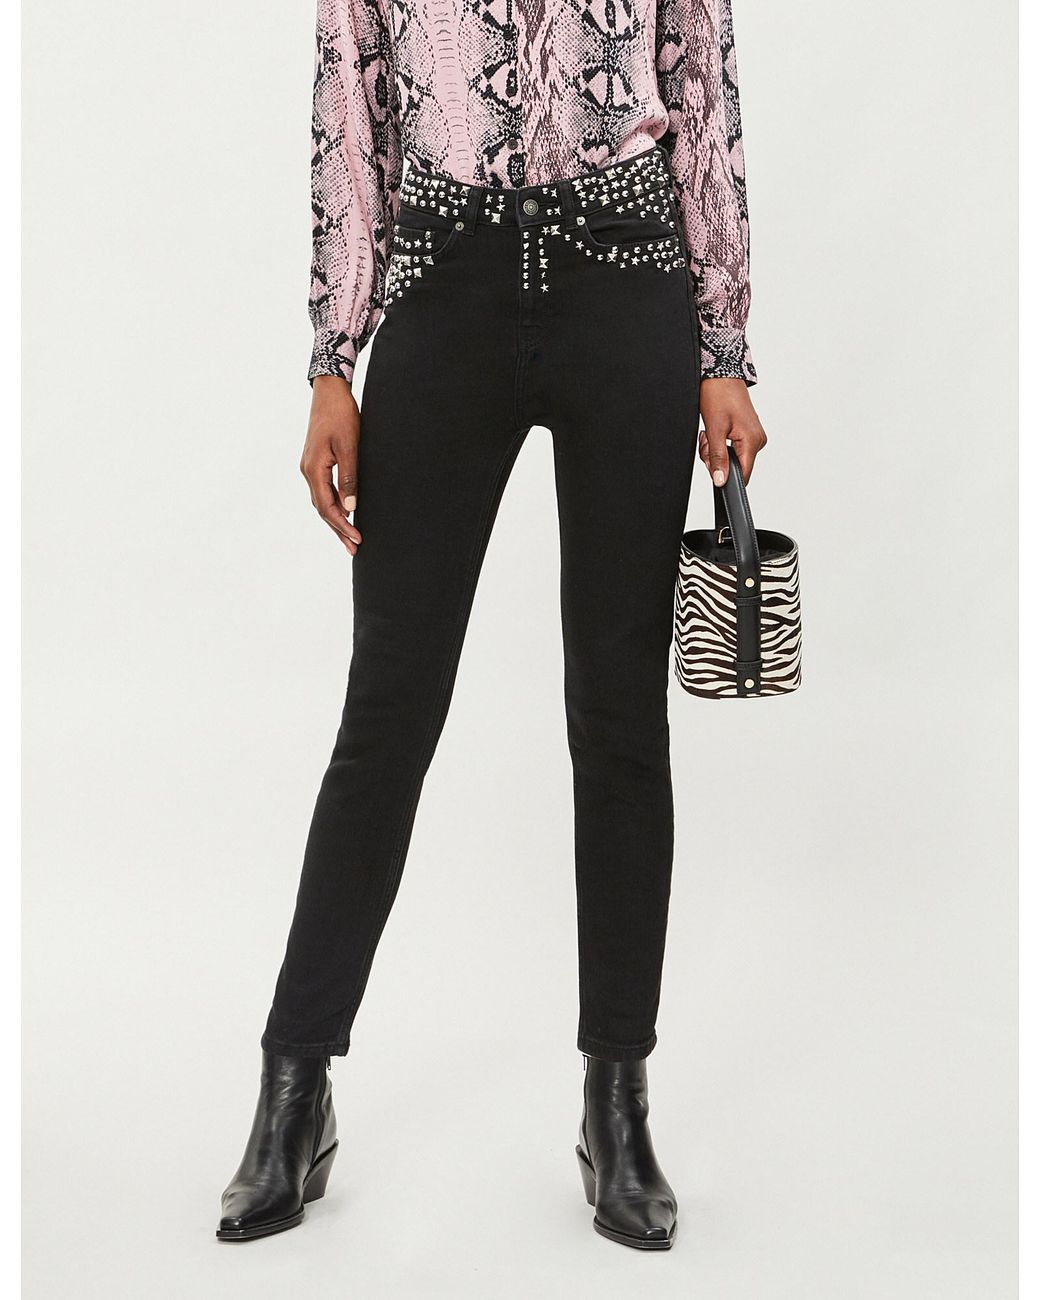 The Kooples Lizzy Studded Jeans in Black | Lyst